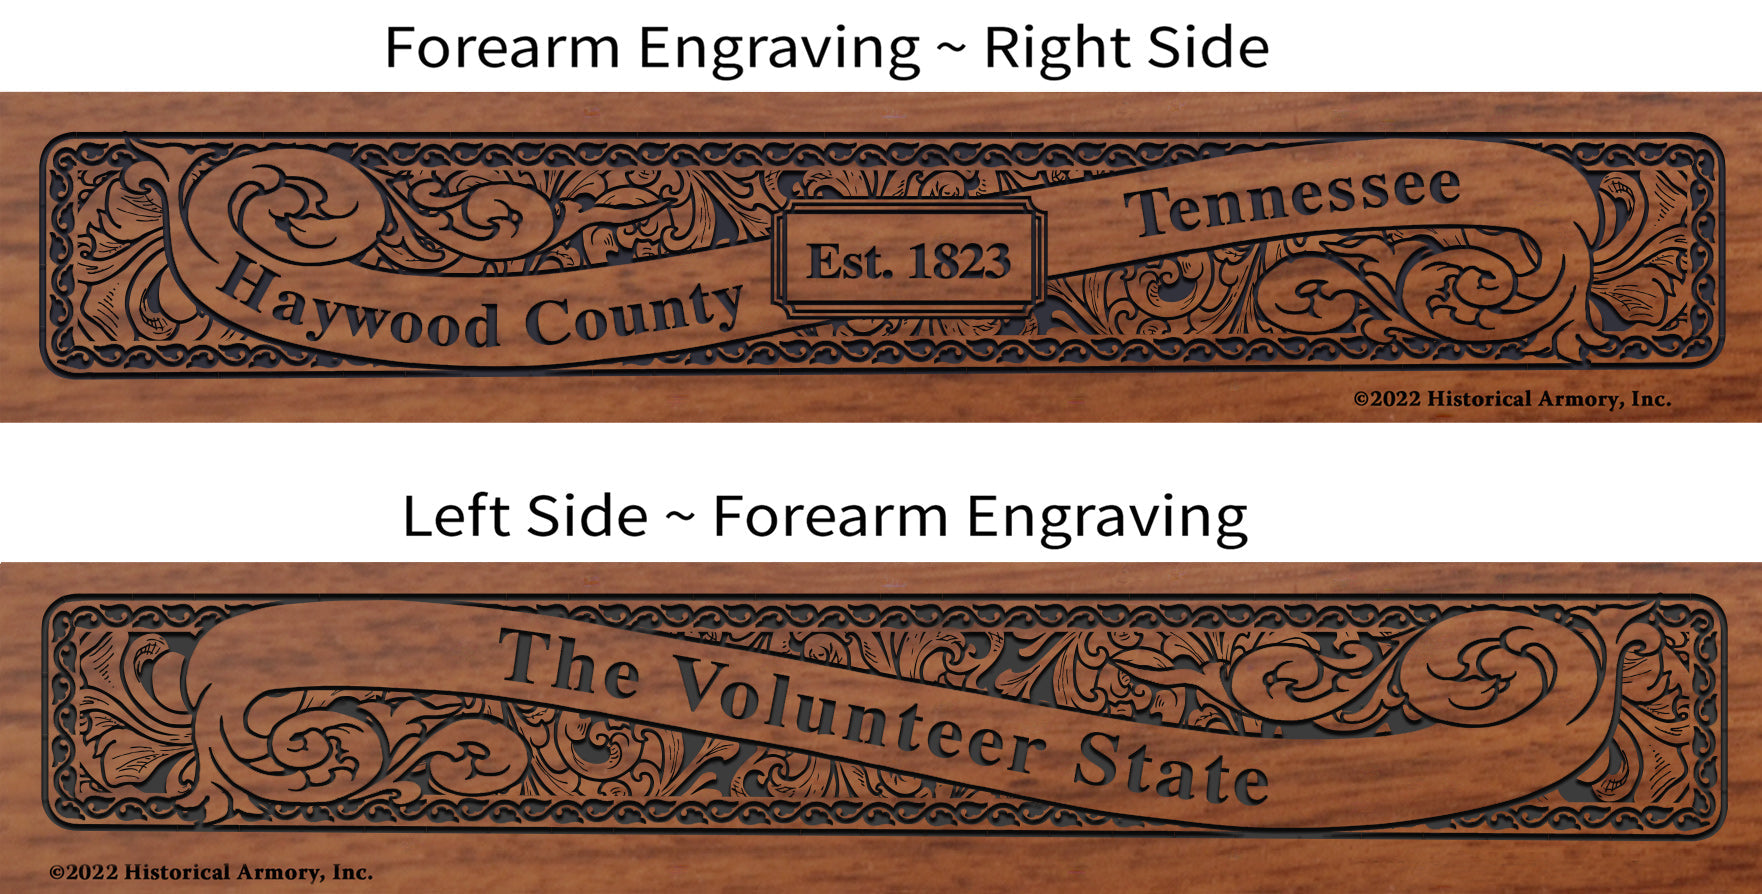 Haywood County Tennessee Engraved Rifle Forearm